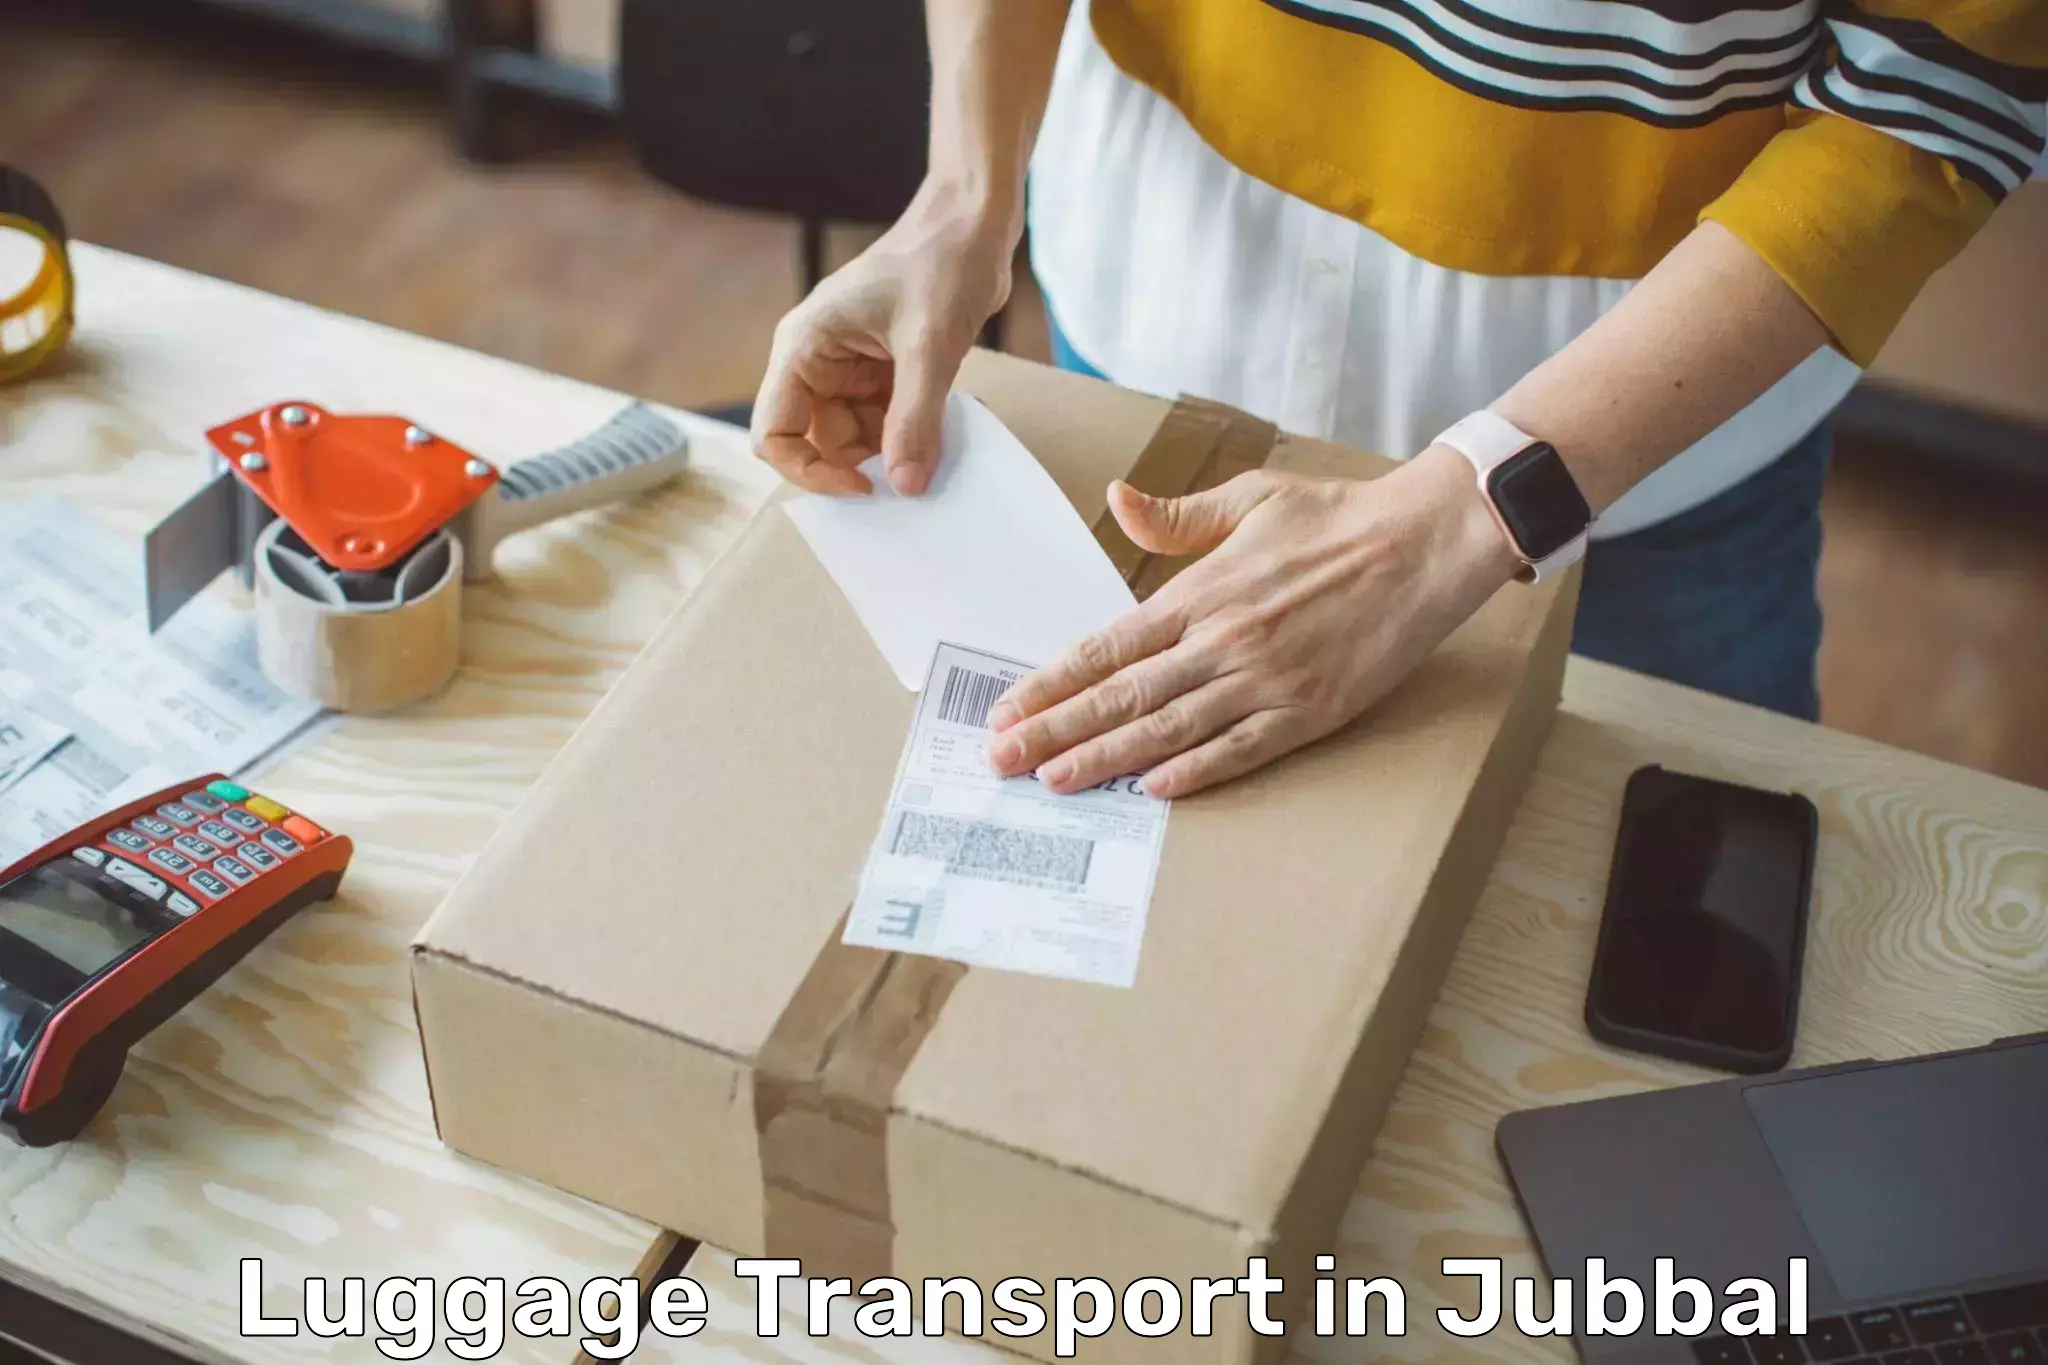 Luggage transport deals in Jubbal